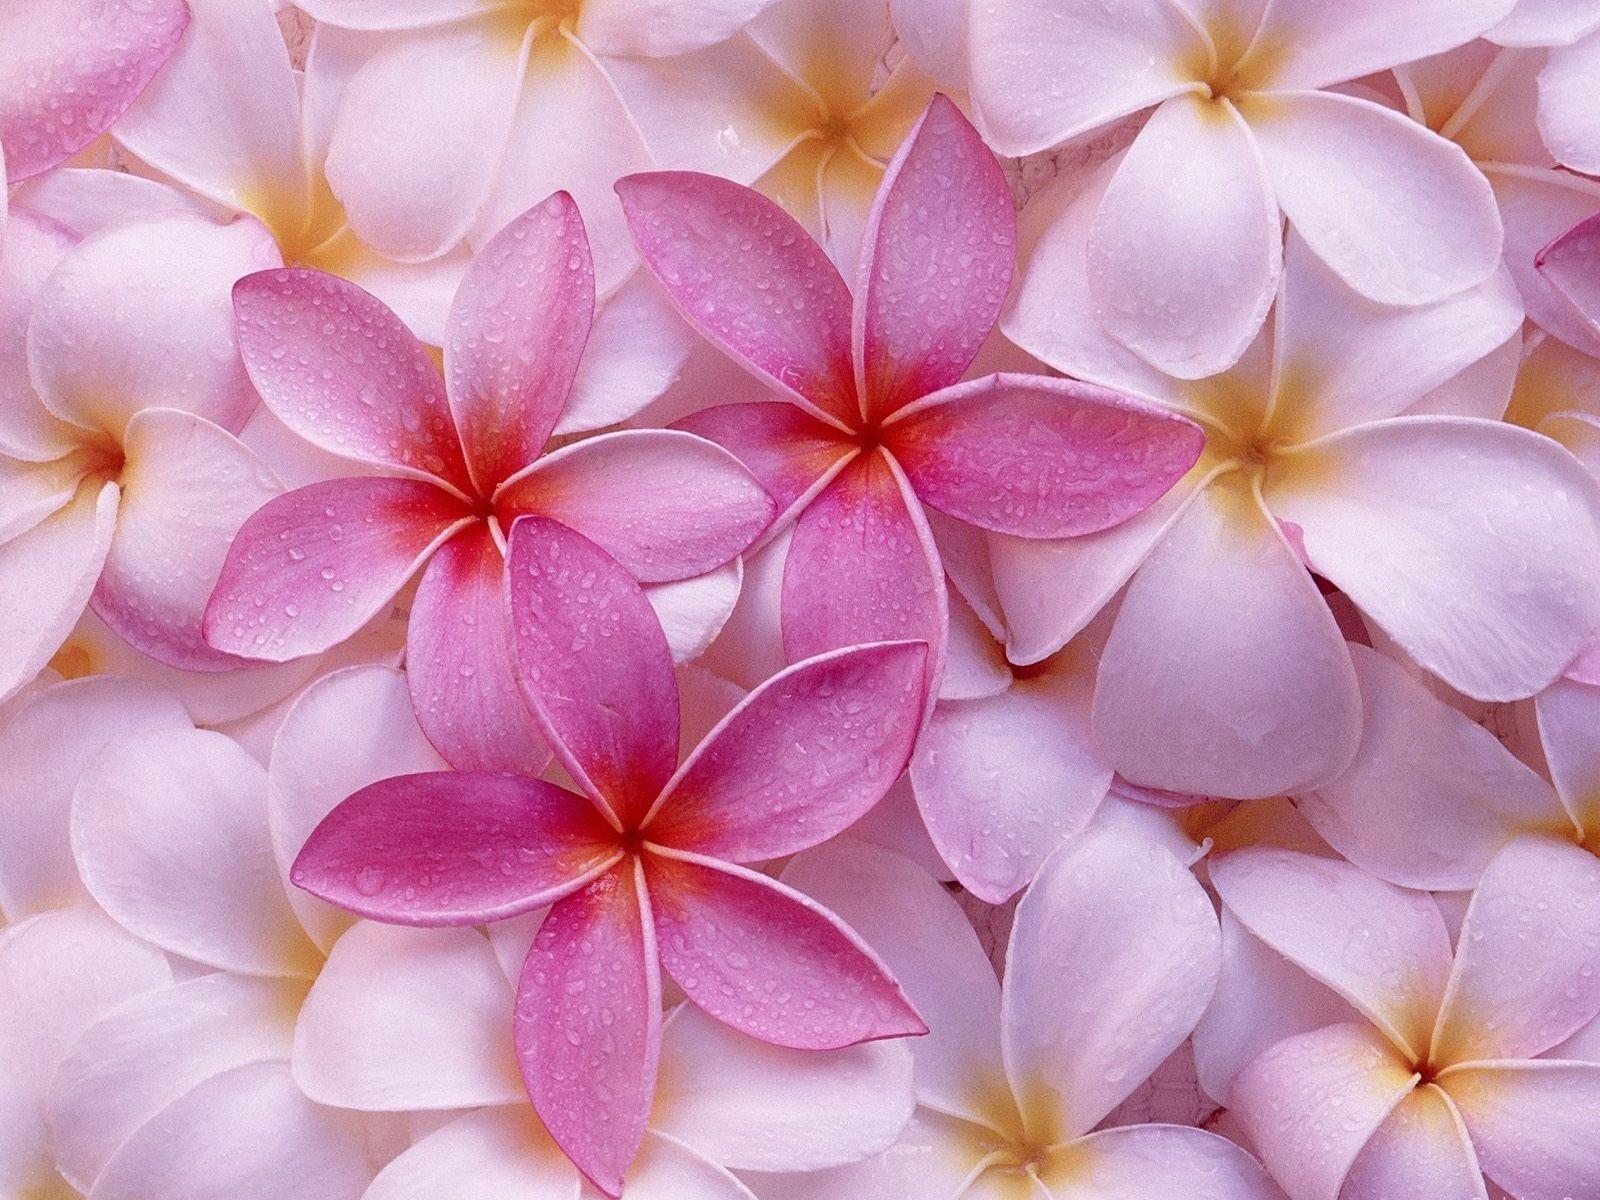 Pink Flowers Wallpaper, Fantastic Pink Flowers Picture